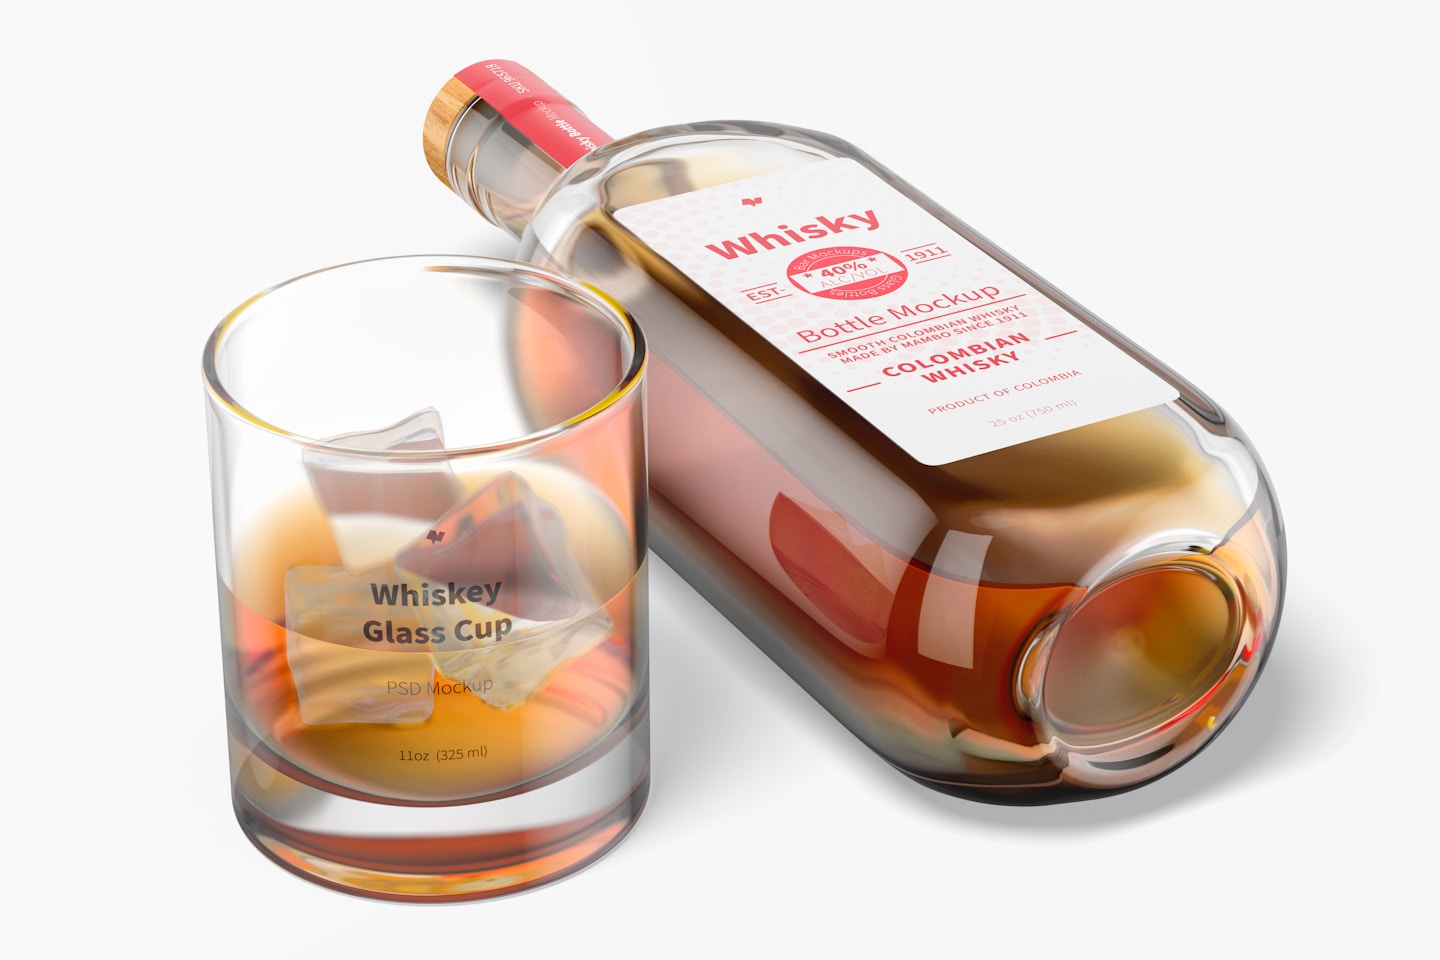 11 oz Whiskey Glass Cup Mockup